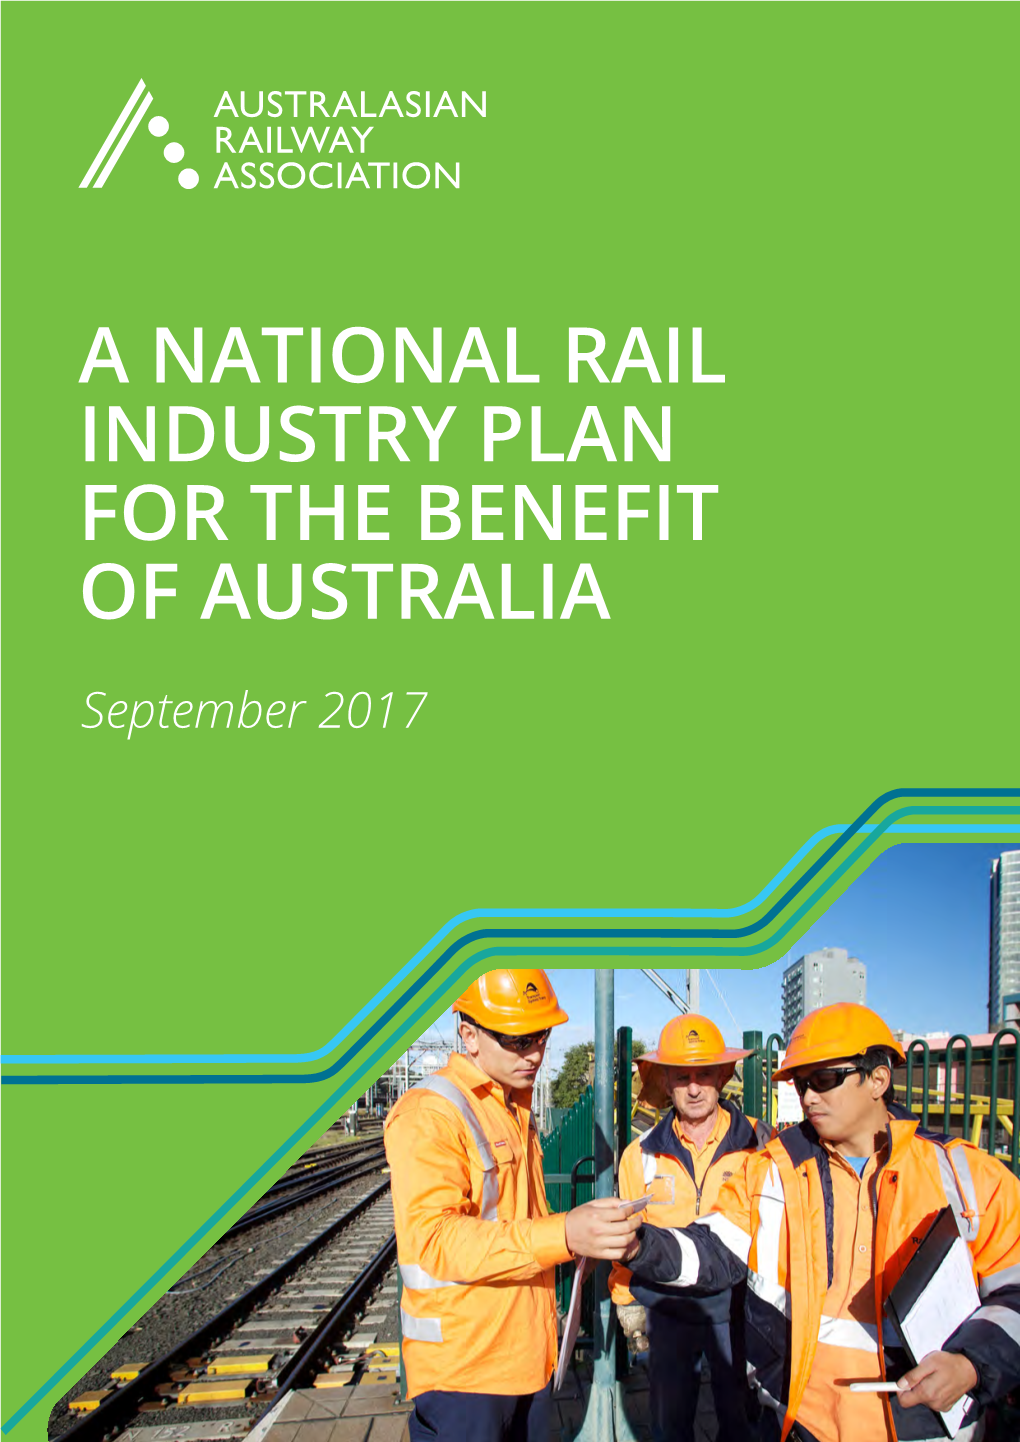 A National Rail Industry Plan for the Benefit of Australia